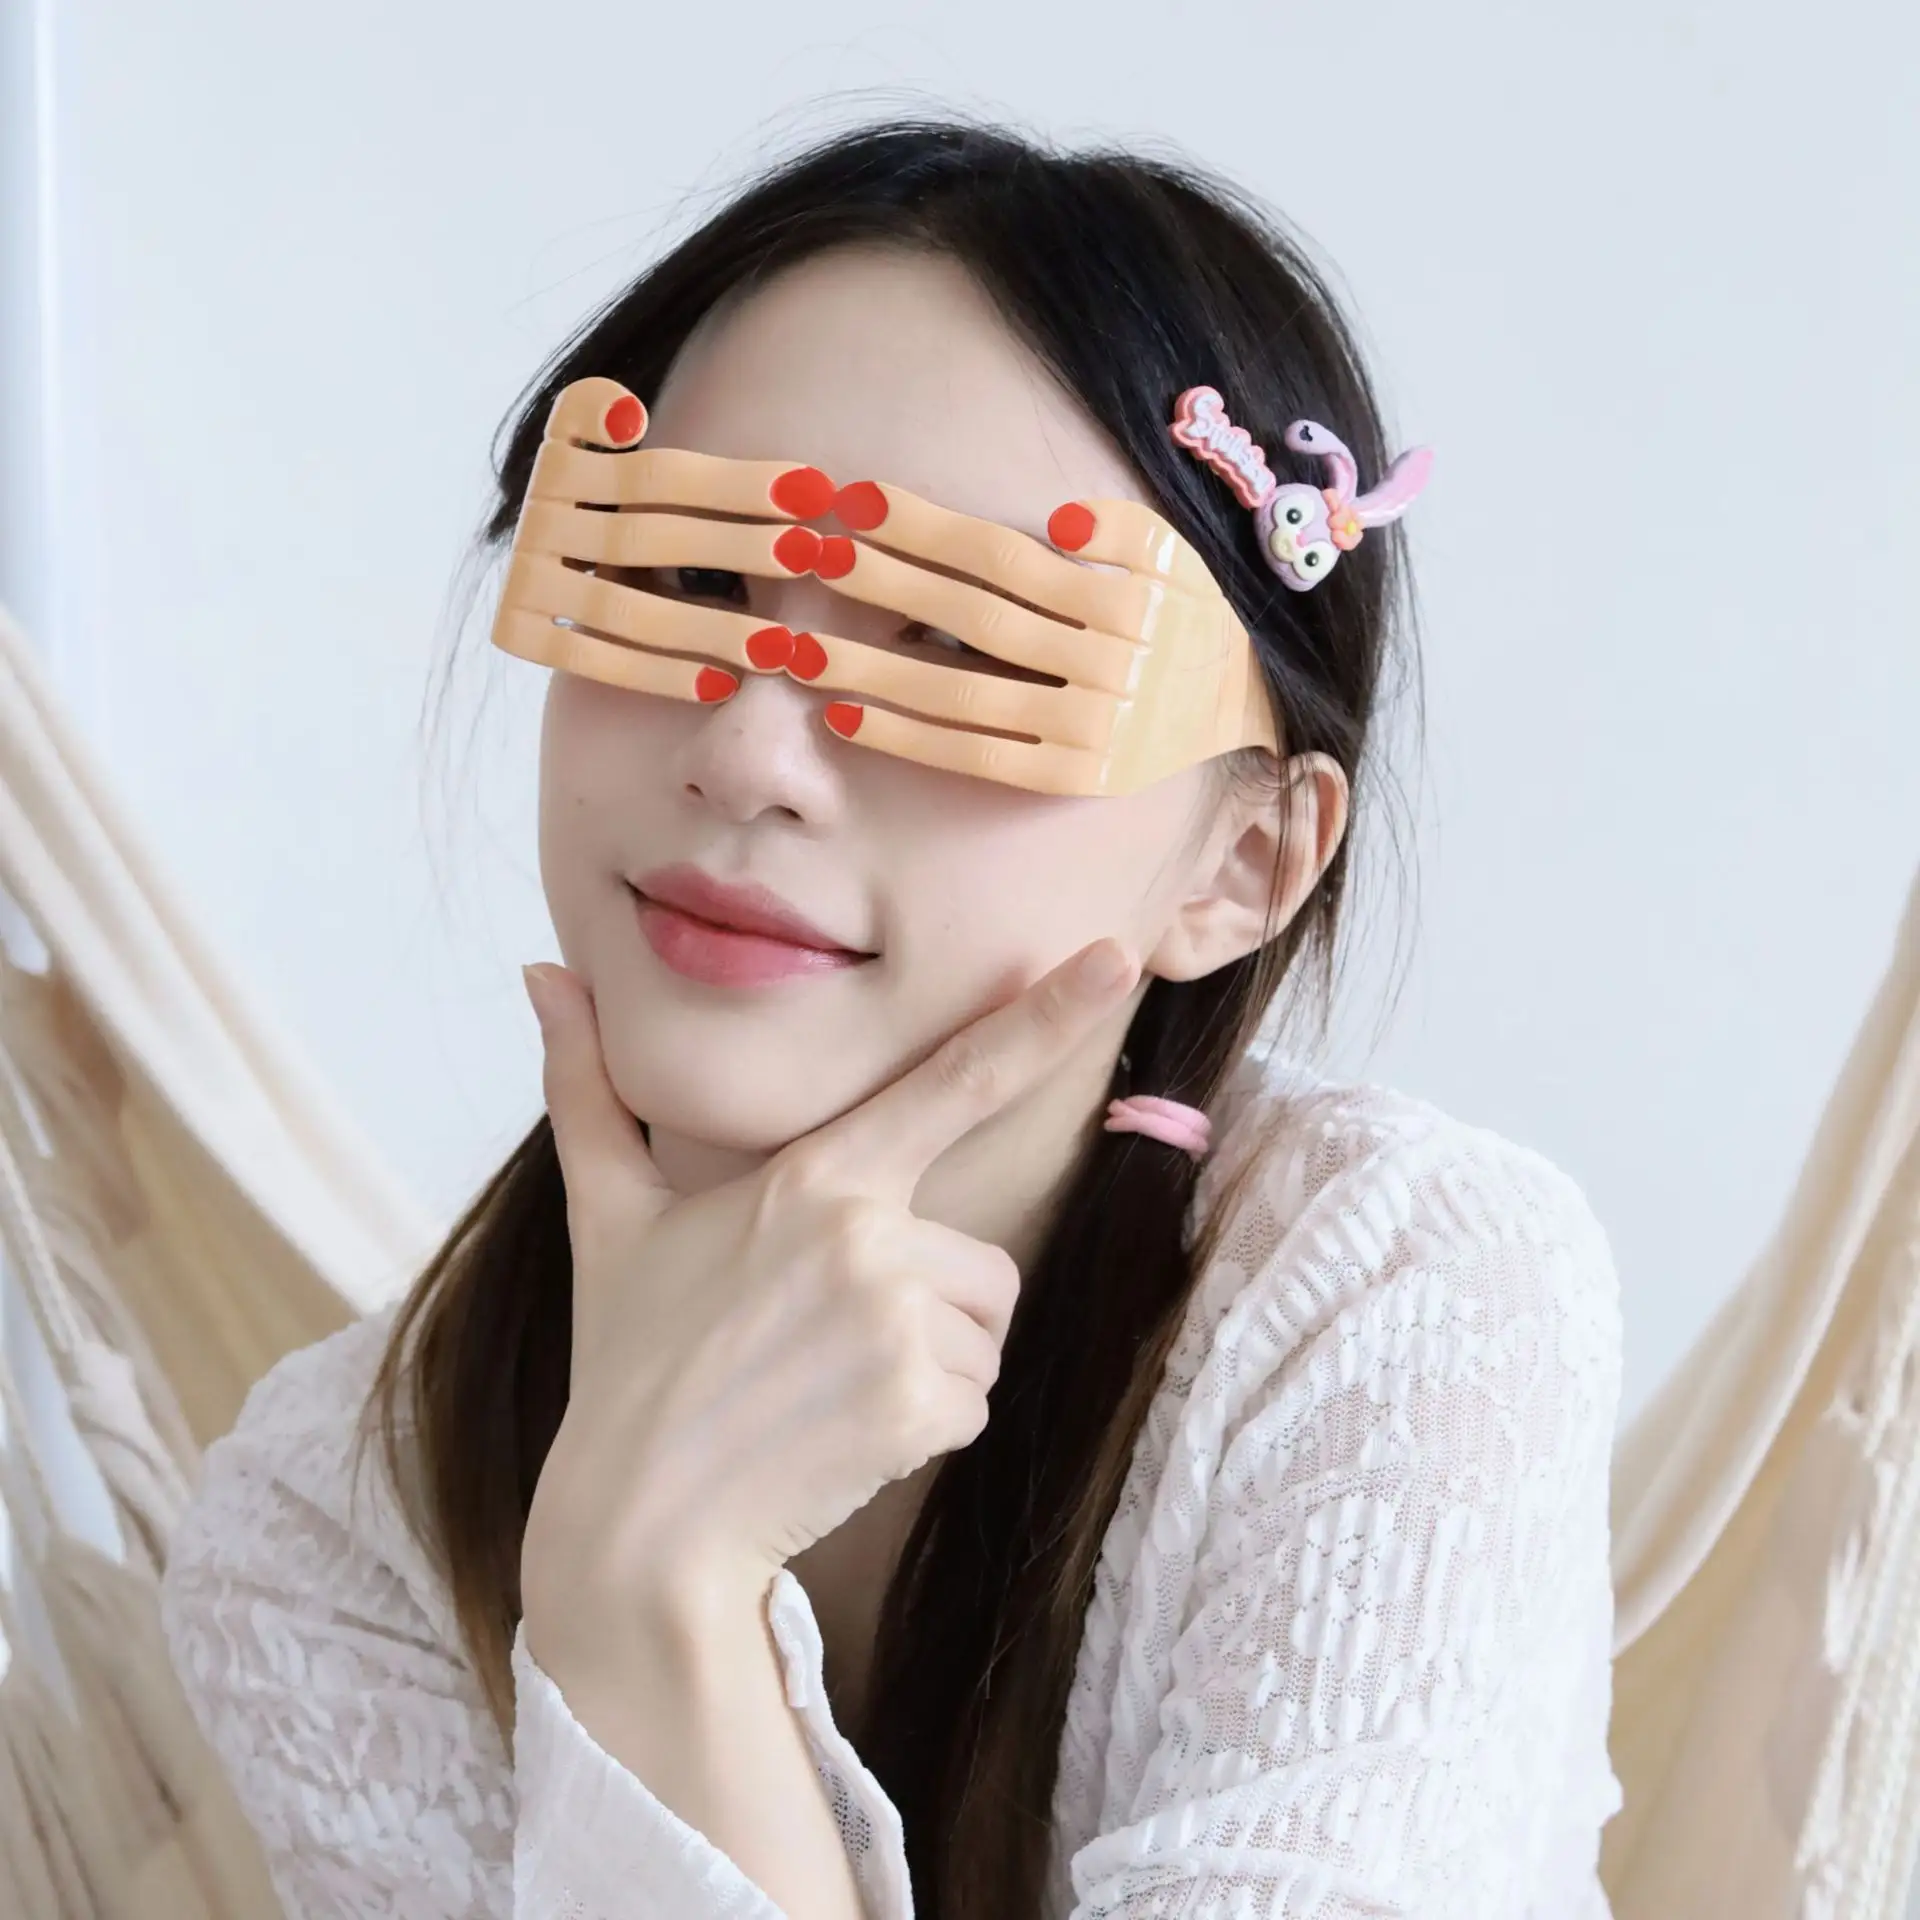 Novelty Fingers-Shaped Glasses Fancy Ball Eye Mask Bar Hen Party Decoration Supplies